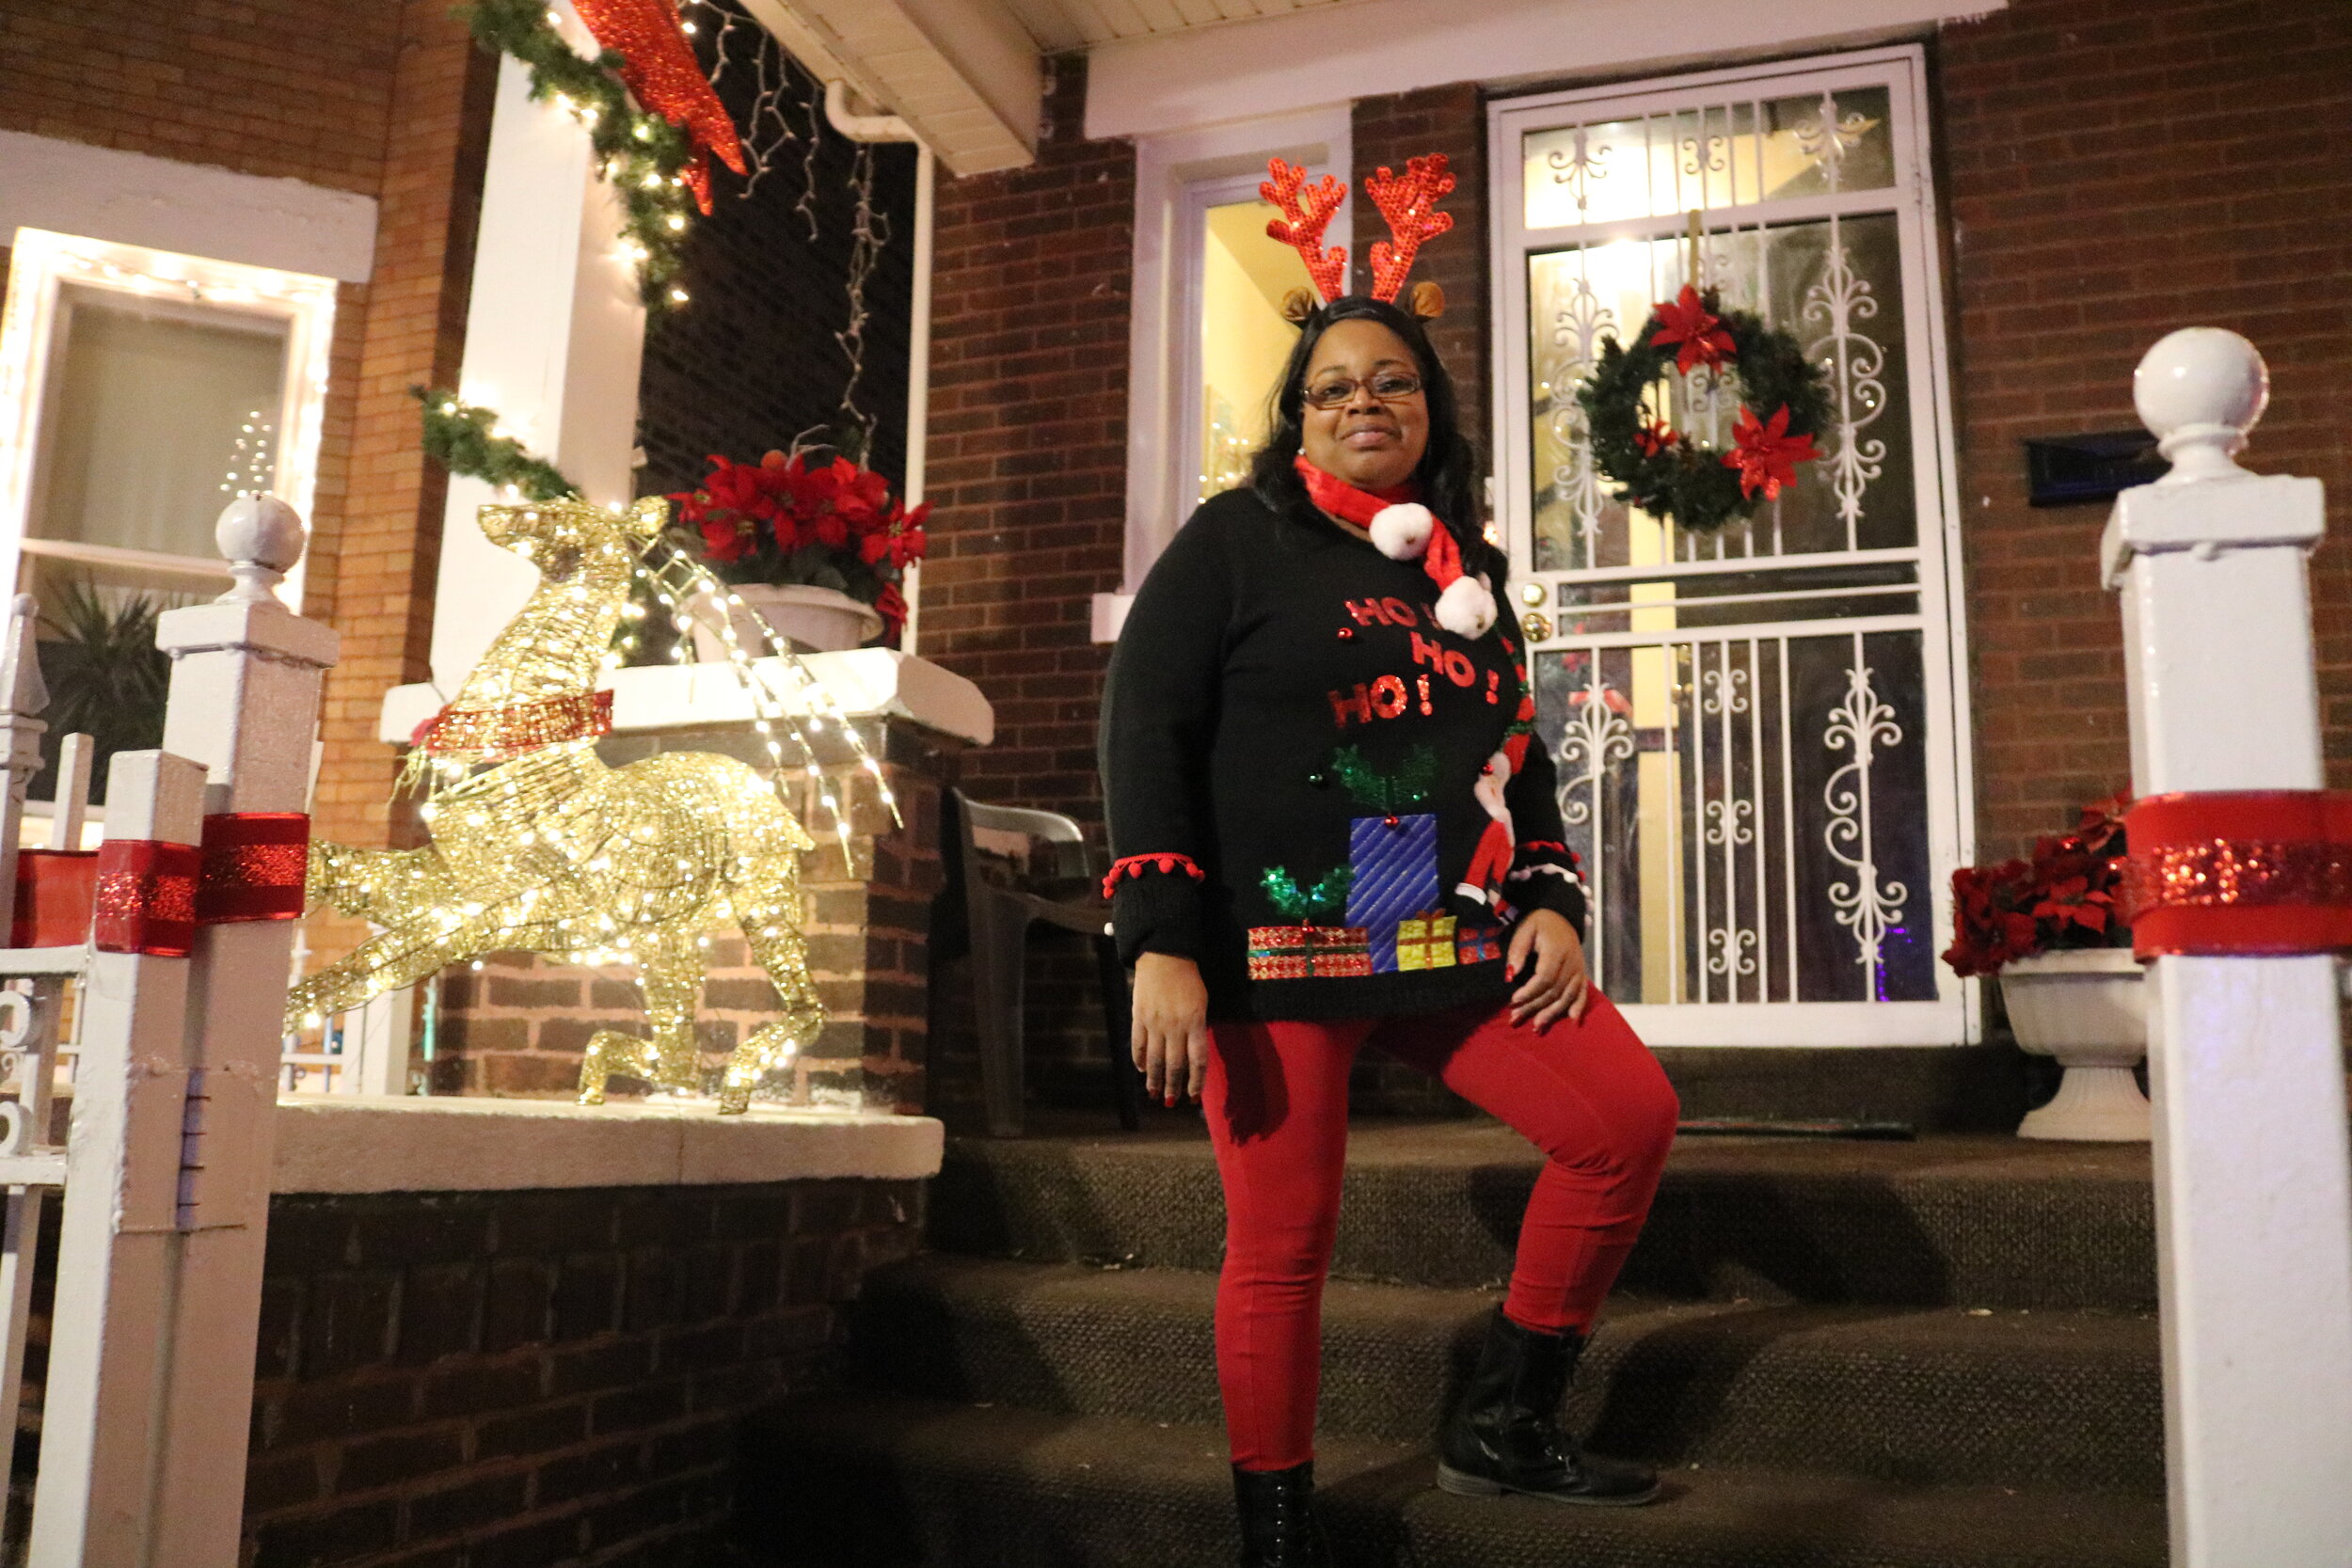  Shay J., a resident of the 3300 W Flournoy block club participates in the Christmas lighting event each year. 